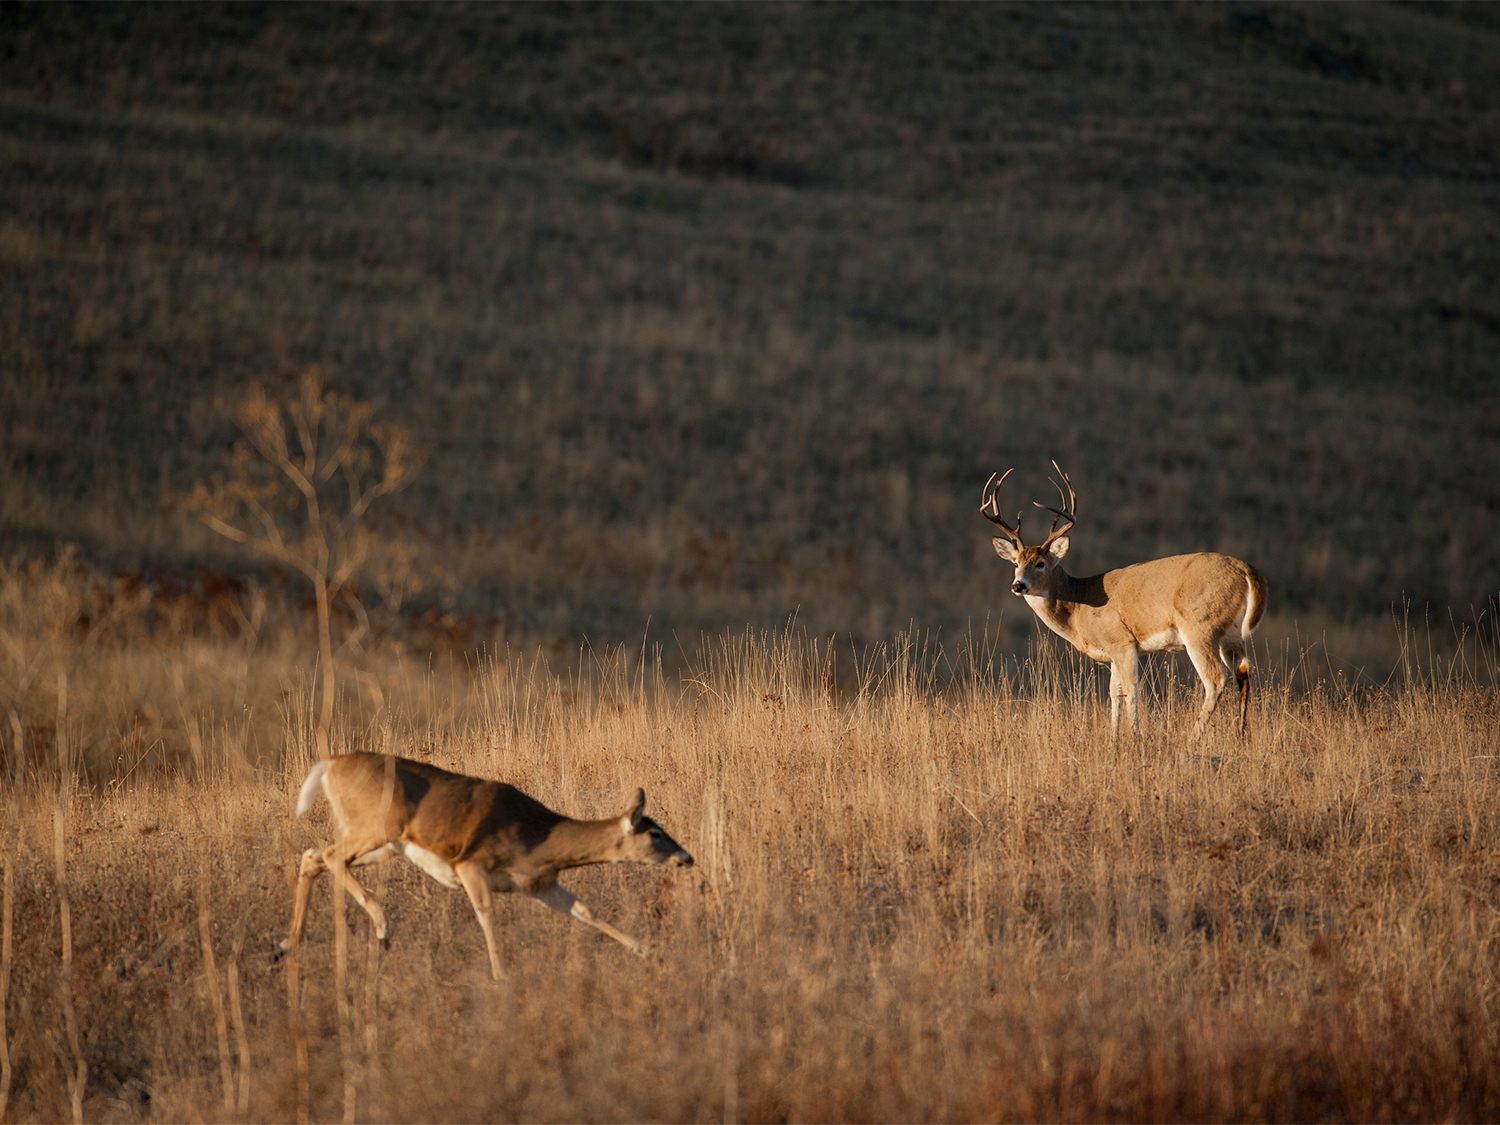 Two whitetail deer circling each other during the rut in an open field.